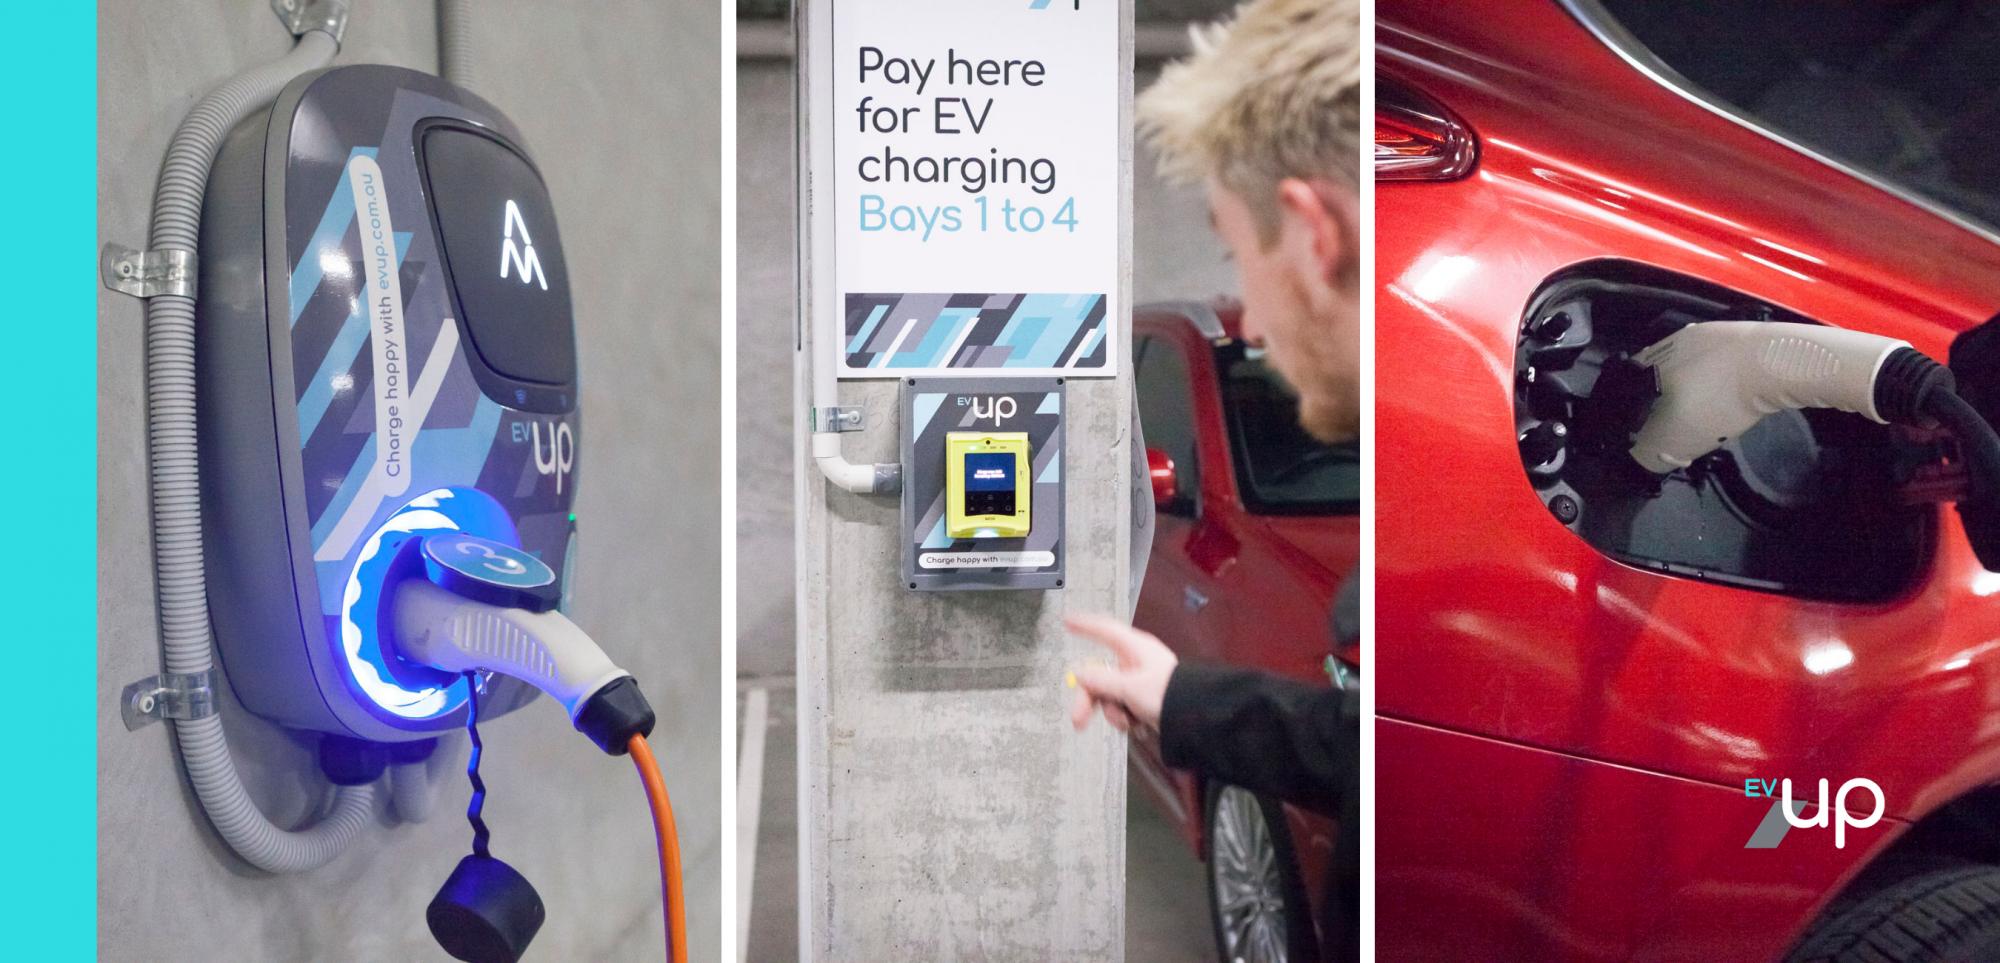 EV charging PayPass tap and go payment systems